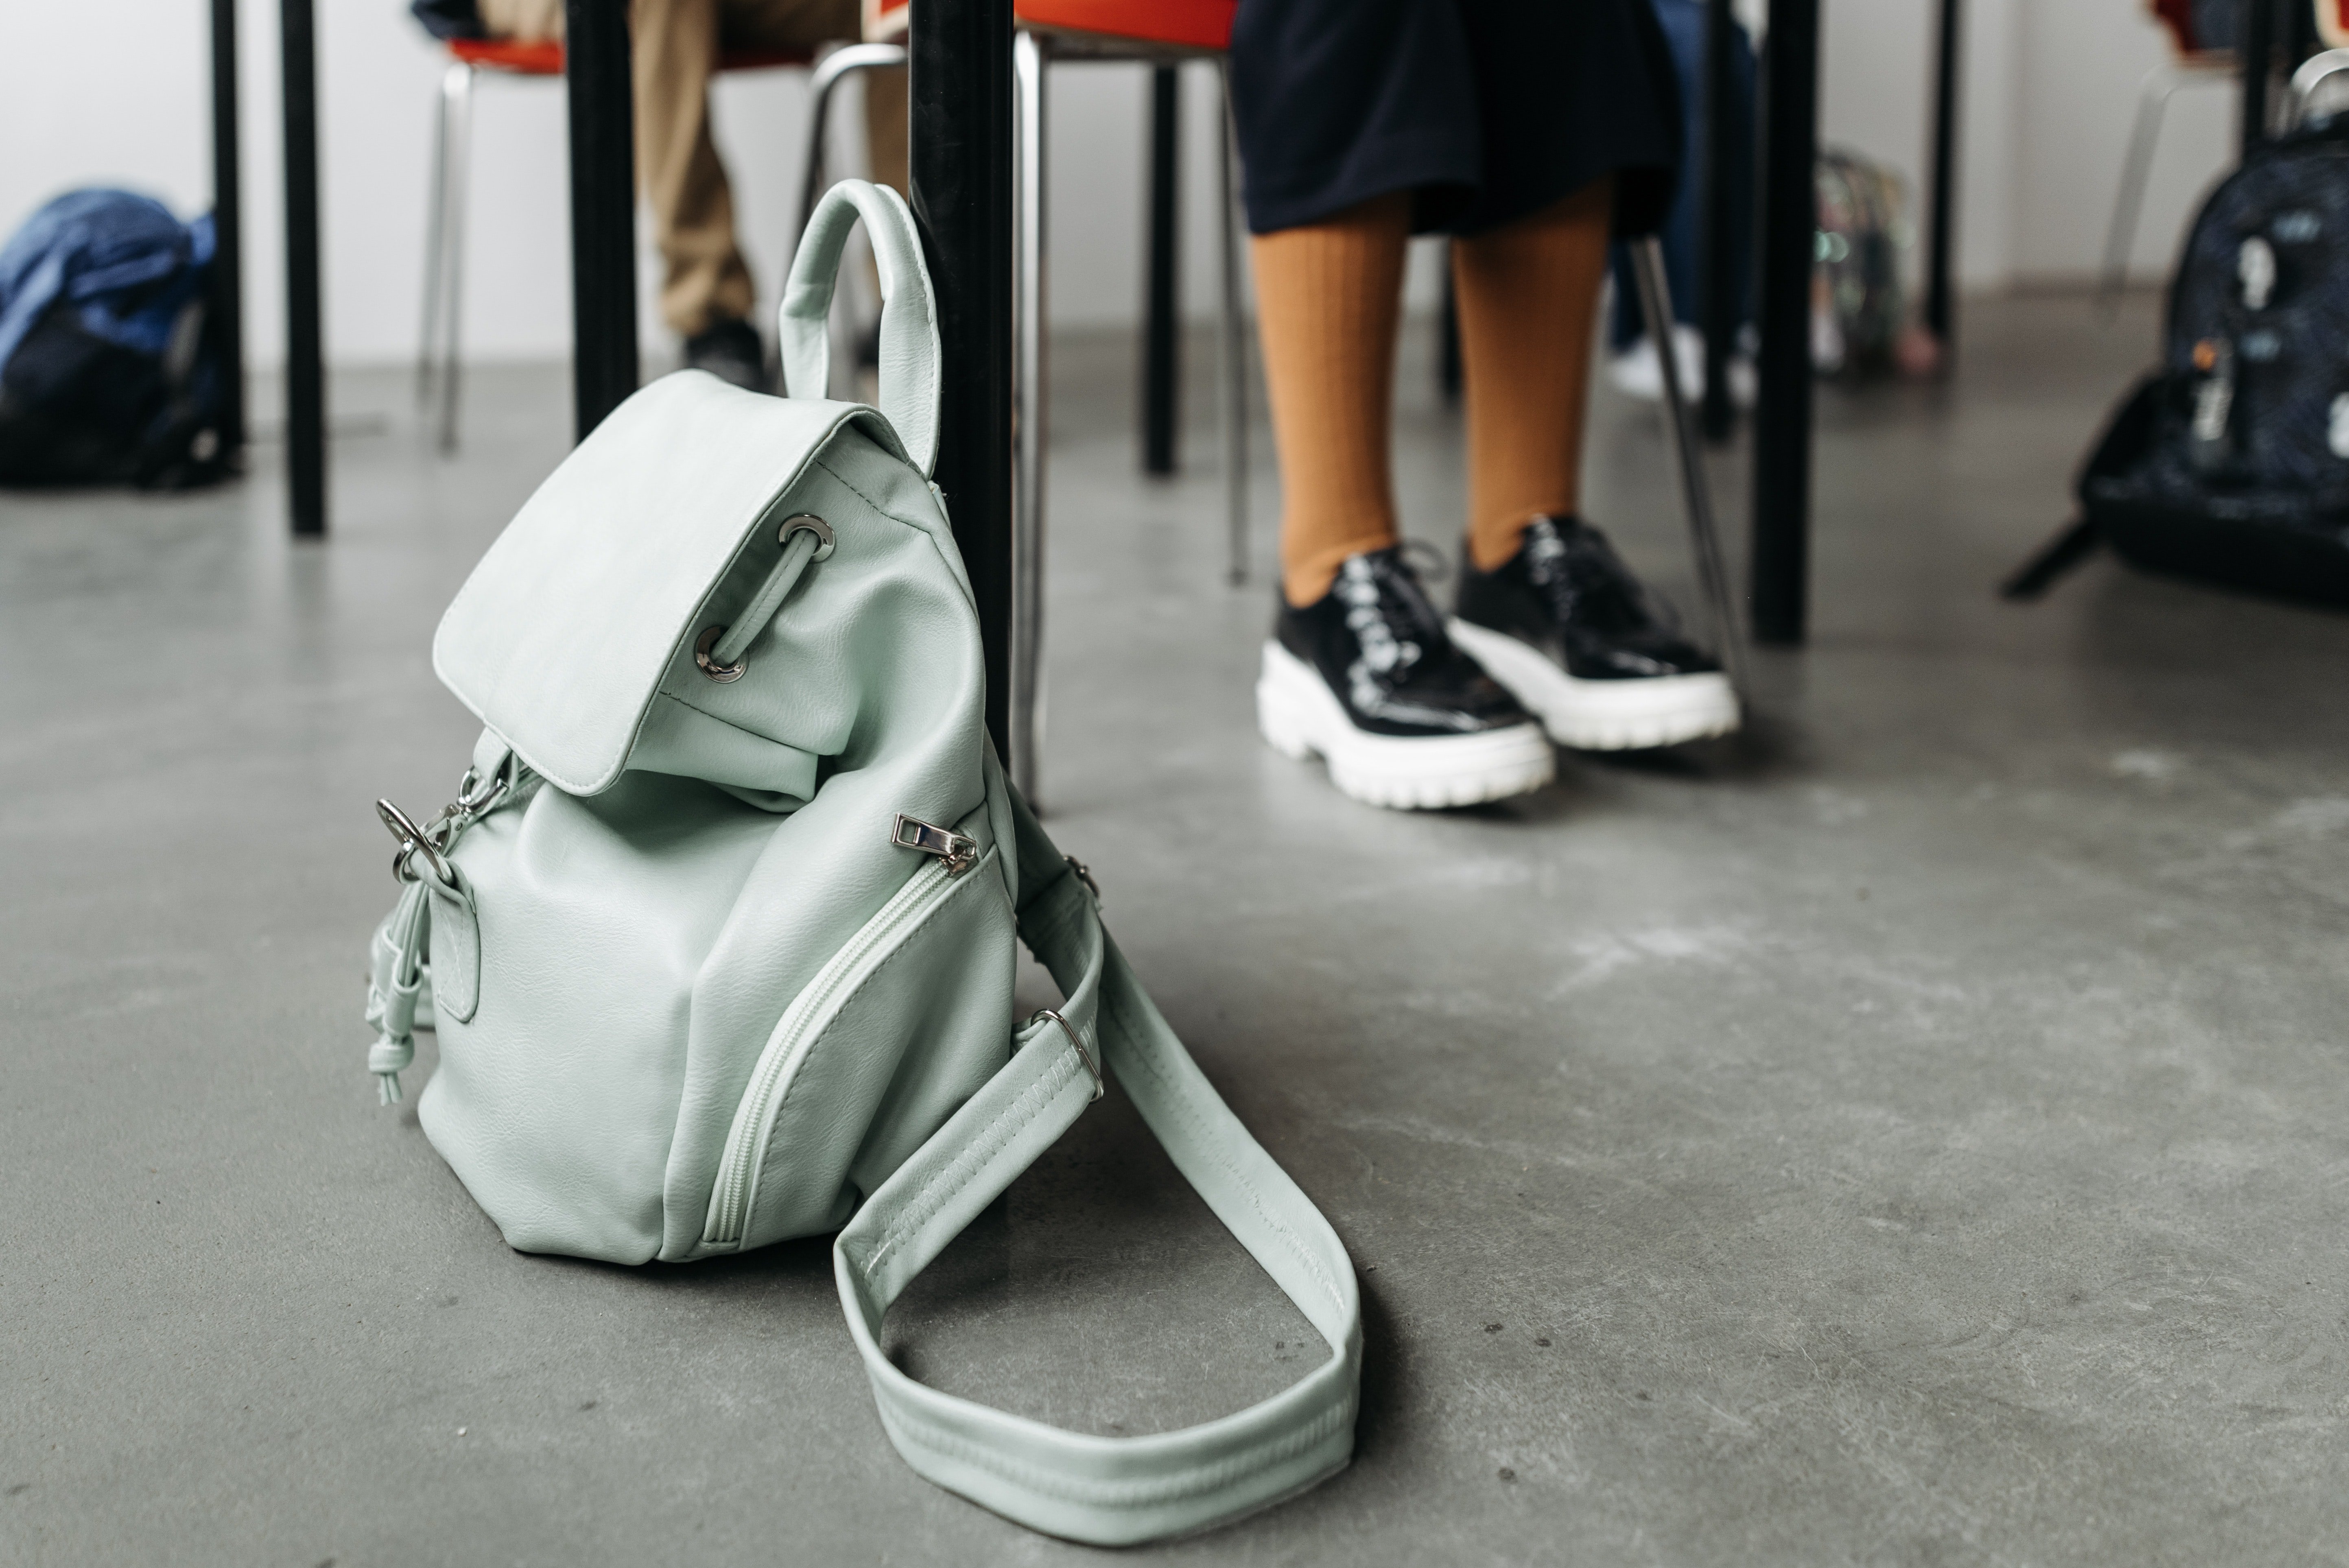 The teacher hated a cluttered aisle & often kicked the students' belongings | Photo: Pexels